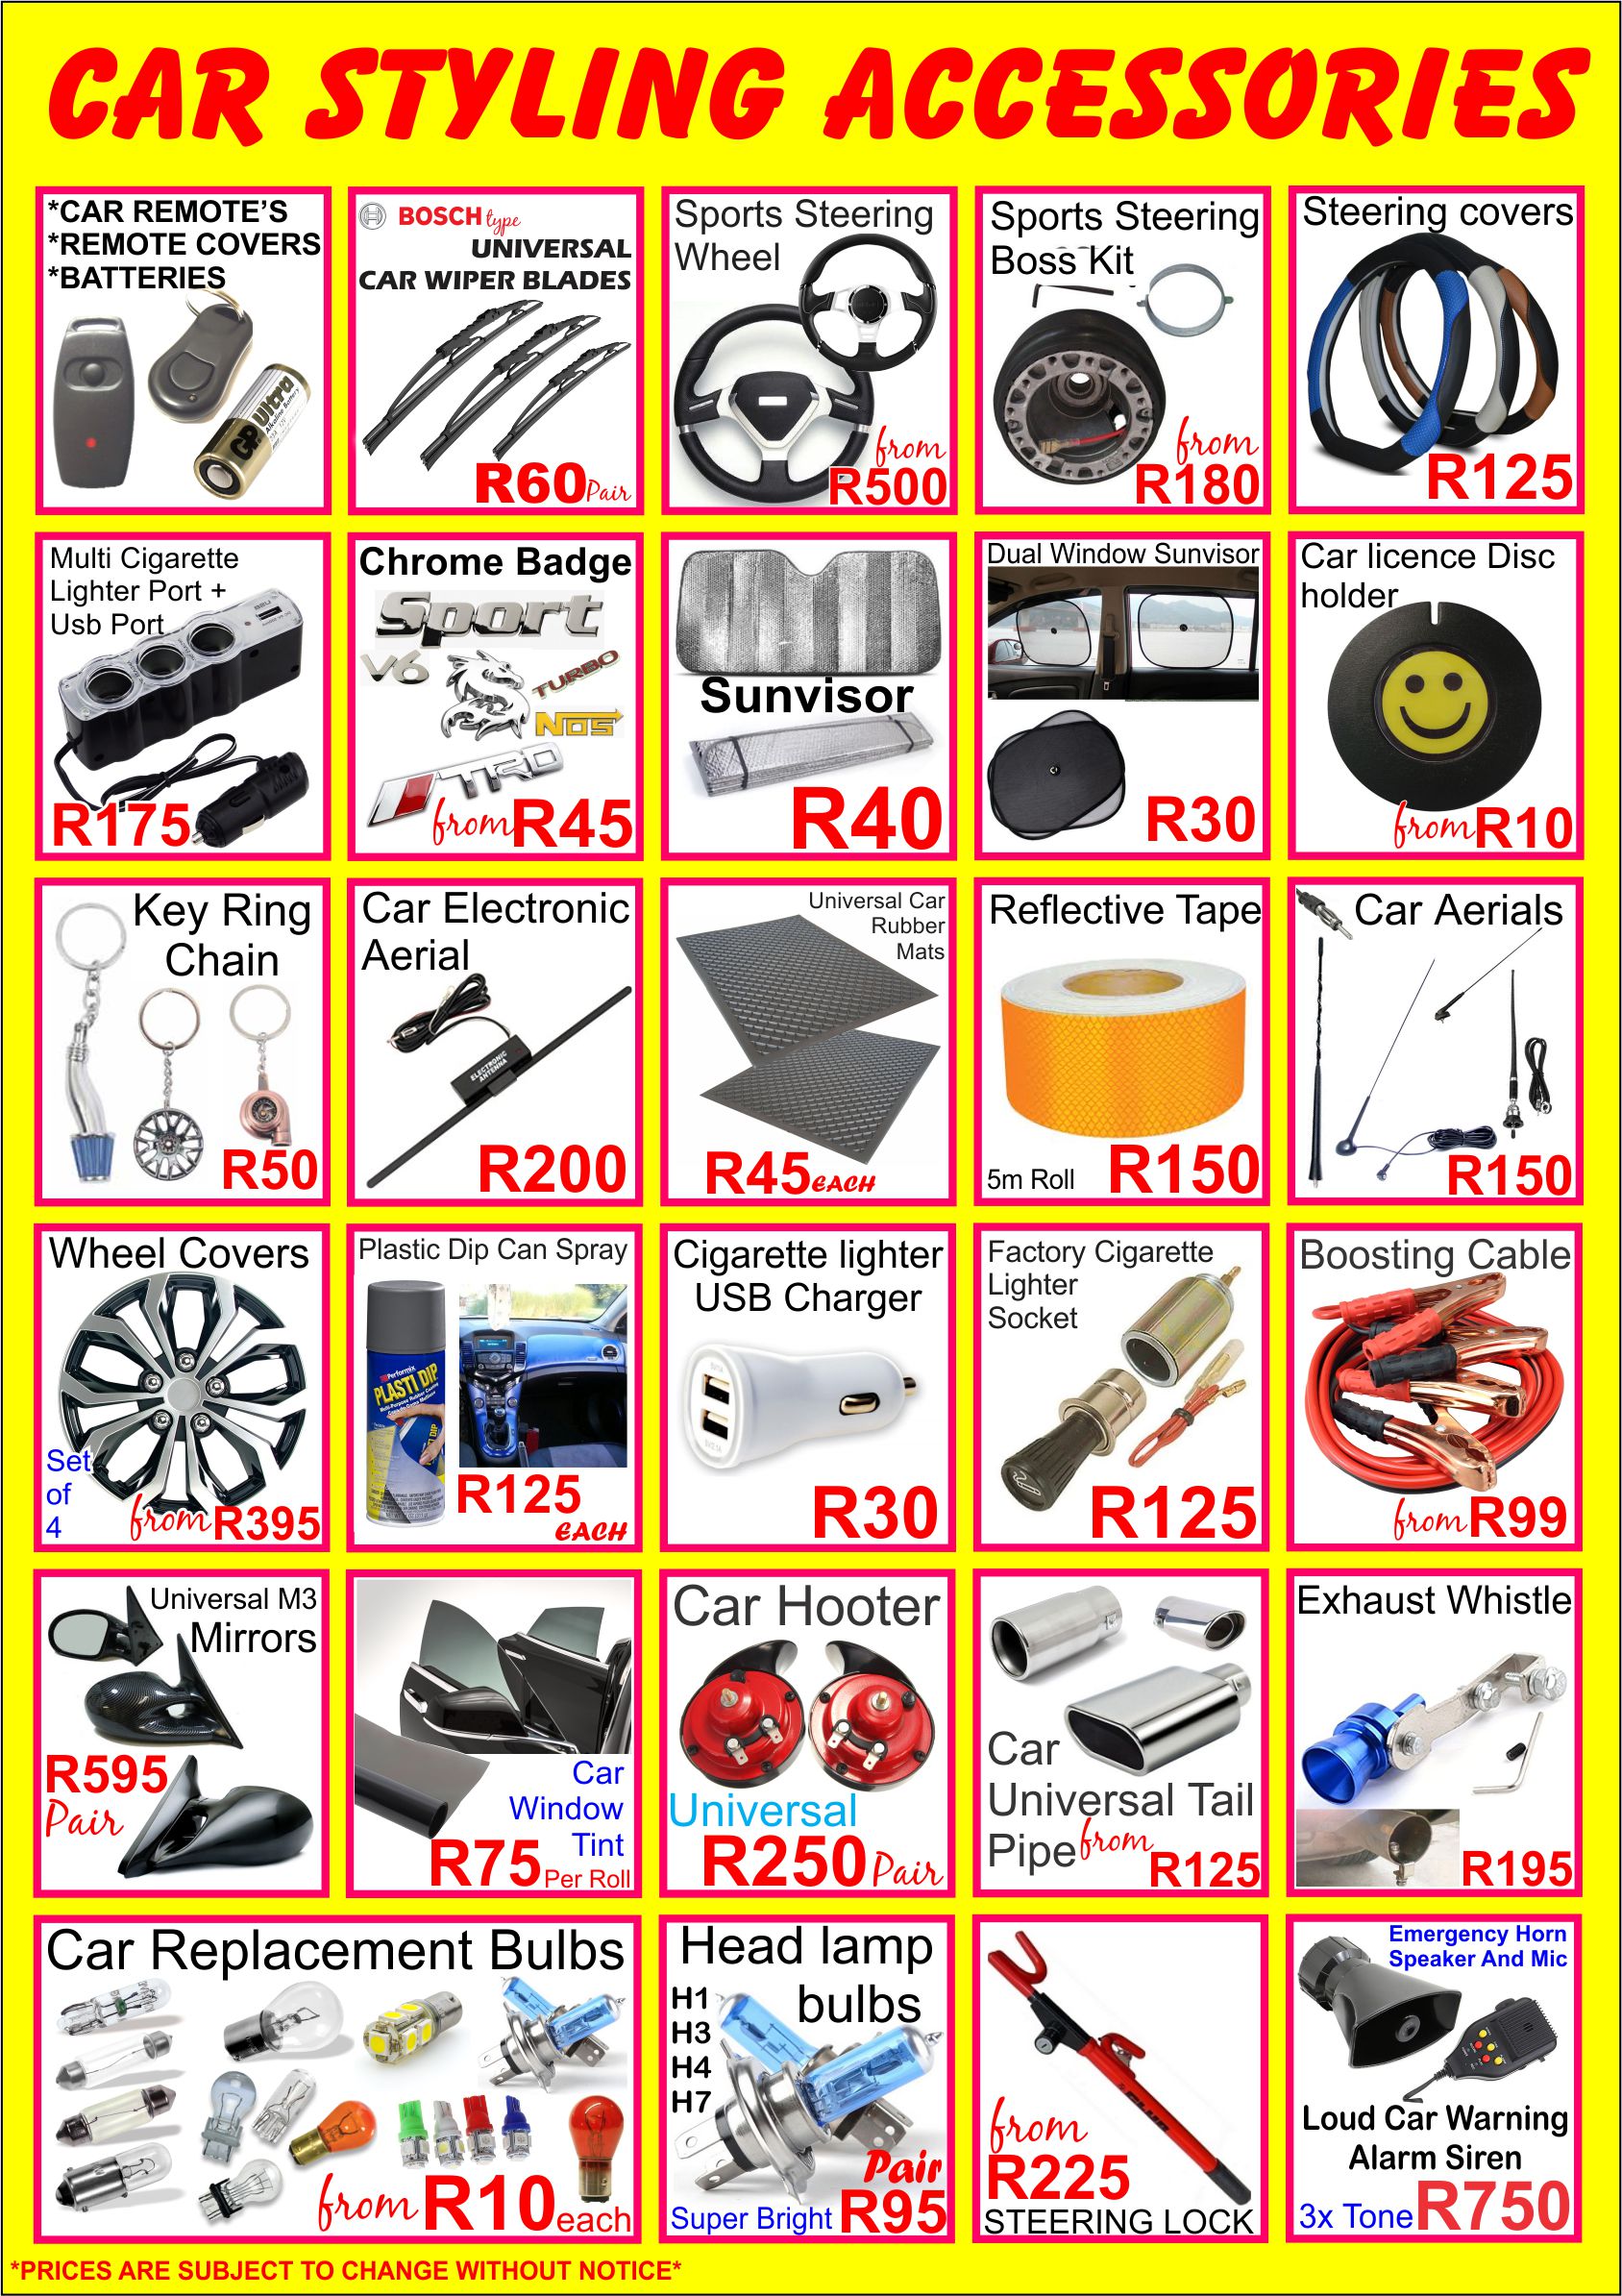 car audio combo , car audio equipment , sony , pioneer ,jvc , kicker , targa , xtc , jbl . starsound  | car audio durban | car audio fitment durban | dj sound durban | disco dj pa equipment durban | disco dj lighting durban | dj mixer durban | dj power amp durban | tv box durban | air mouse durban | behringer durban | gravity sound and lighting warehouse durban | dj smoke achine durban | dj smoke fluid durban | disco dj lighting durban | disco dj led lighting durban | disco dj lazer lighting durban | car amps durban | car decks durban | car bluetooth decks durban | car van double dins durban | car subs durban | starsound grey cones subwoofers durban | Car accessories durban | disco dj party combos durban | J EQUIPMENT | DISCO DJ LIGHTING | DJ/PA COMBO PACKAGES | MULITIMEDIA | MOBILE DISCO-DJ FOR HIRE  SOUND EQUIPMENT HIRE | PROJECTOR AND SCREEN FOR HIRE | ELECTRONIC REPAIR CENTRE  GHD HAIR IRON REPIARS-CLOUD NINE | PUBLIC ADDRESS SYSTEMS | PA DESK MIXERS  SANITIZER FOGGING MACHINES | POWER AMPLIFER | CROSSOVER / EQUALIZER | DISCO / PA SPEAKERS  HOME THEATRE SYSTEMS | SANITIZER SMOKE MACHINE | DJ MIXERS | DJ ACCESSORIES  DJ CD / MP3 PLAYERS / MIDI CONTROLLERS | DISCO BOXES | MICROPHONES | CAR AUDIO | CAR AUDIO FITMENT  SANITIZER THERMAL FOGGER MACHINES | CAR ACCESSORIES | CAR SPEAKERS | CAR AMPLIFIERS | CAR SOUND FITMENT  MARINE AUDIO |DISCO LIGHTING FOR HIRE ,SOUND EQUIPMENT FOR HIRE ,PROJECTOR / SCREEN / STAGE FOR HIRE ,COLOUR WASH HIRE,MOOD LIGHTING HIRE ,INTELLIGENT LIGHTING HIRE , OUTDOOR LANTERN HIRE , DJ SOUND FOR HIRE , CONFETTI HIRE , ROSE PETAL HIRE , SMOKE MACHINE HIRE , UV LIGHITNG HIRE DURBAN , SOUND AND LIGHTING HIRE DURBAN